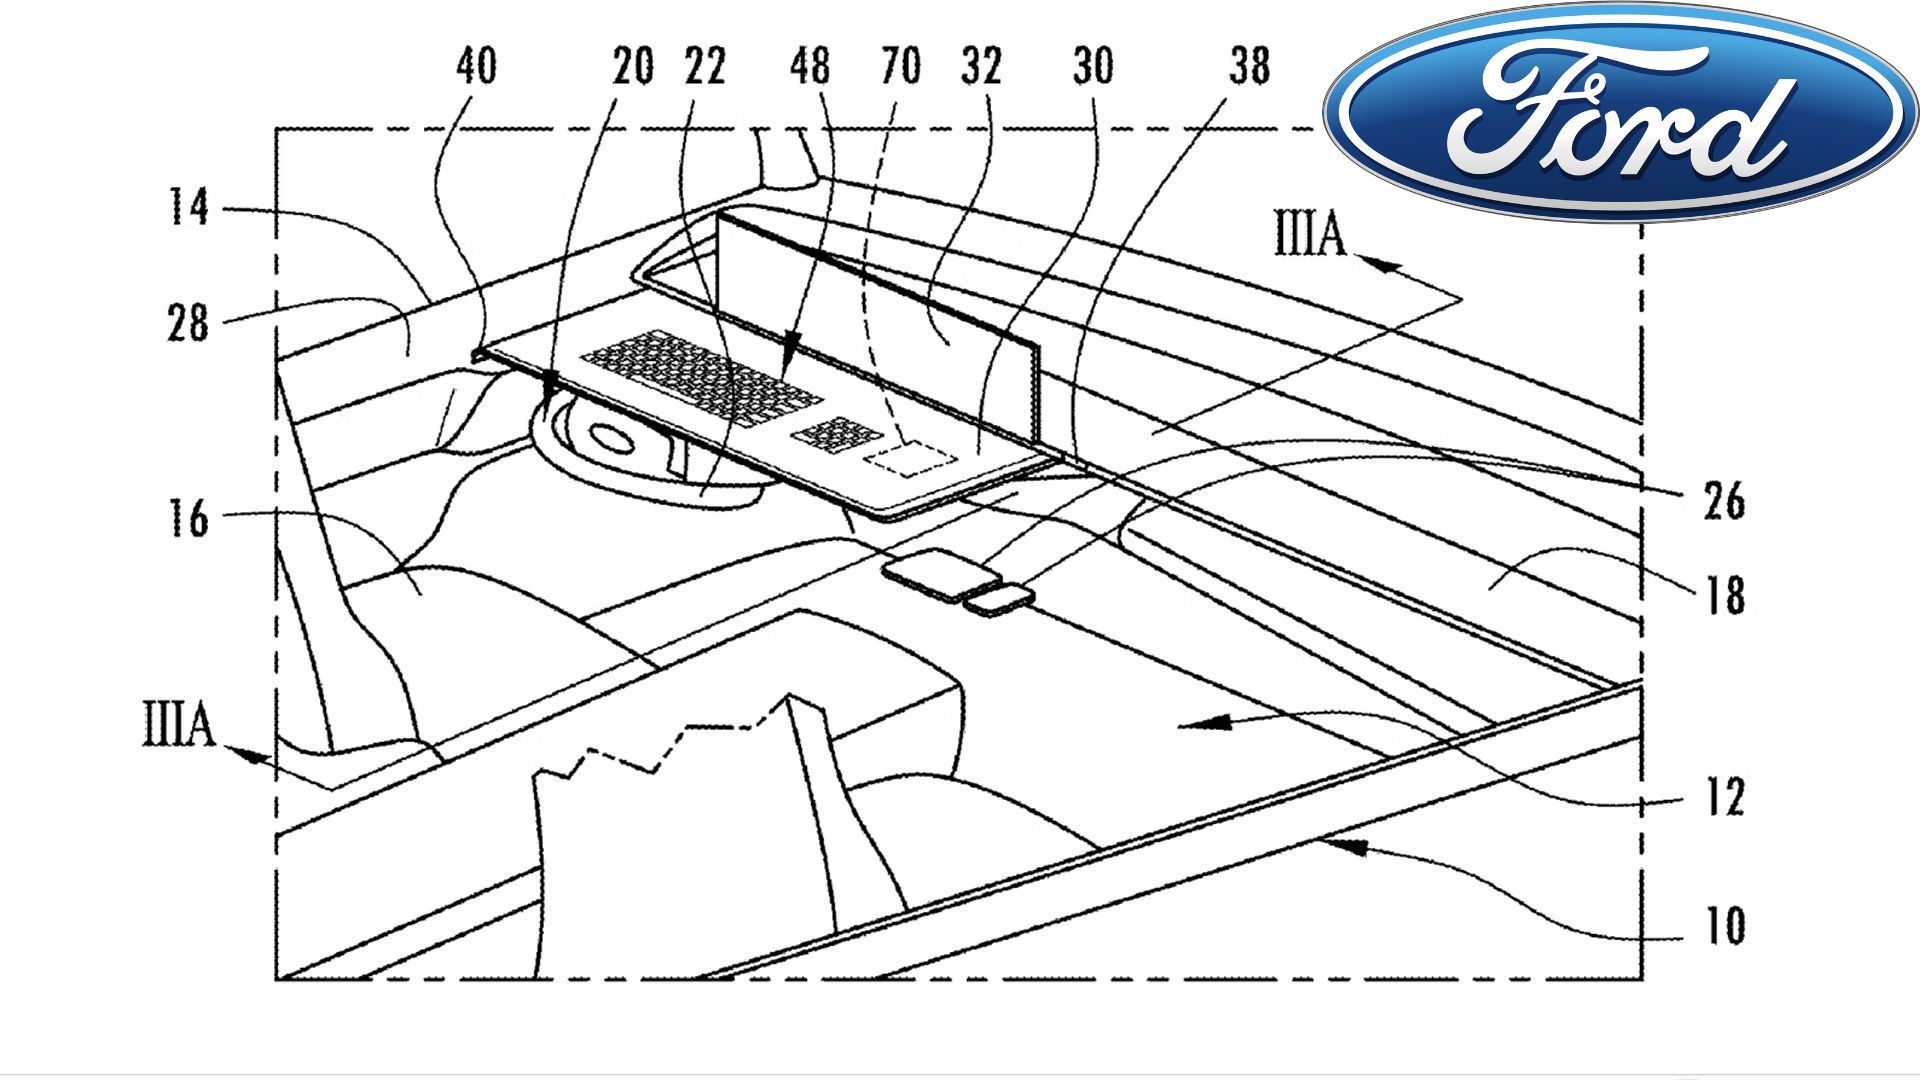 Ford Sliding Desk In Car Patent Featured Image